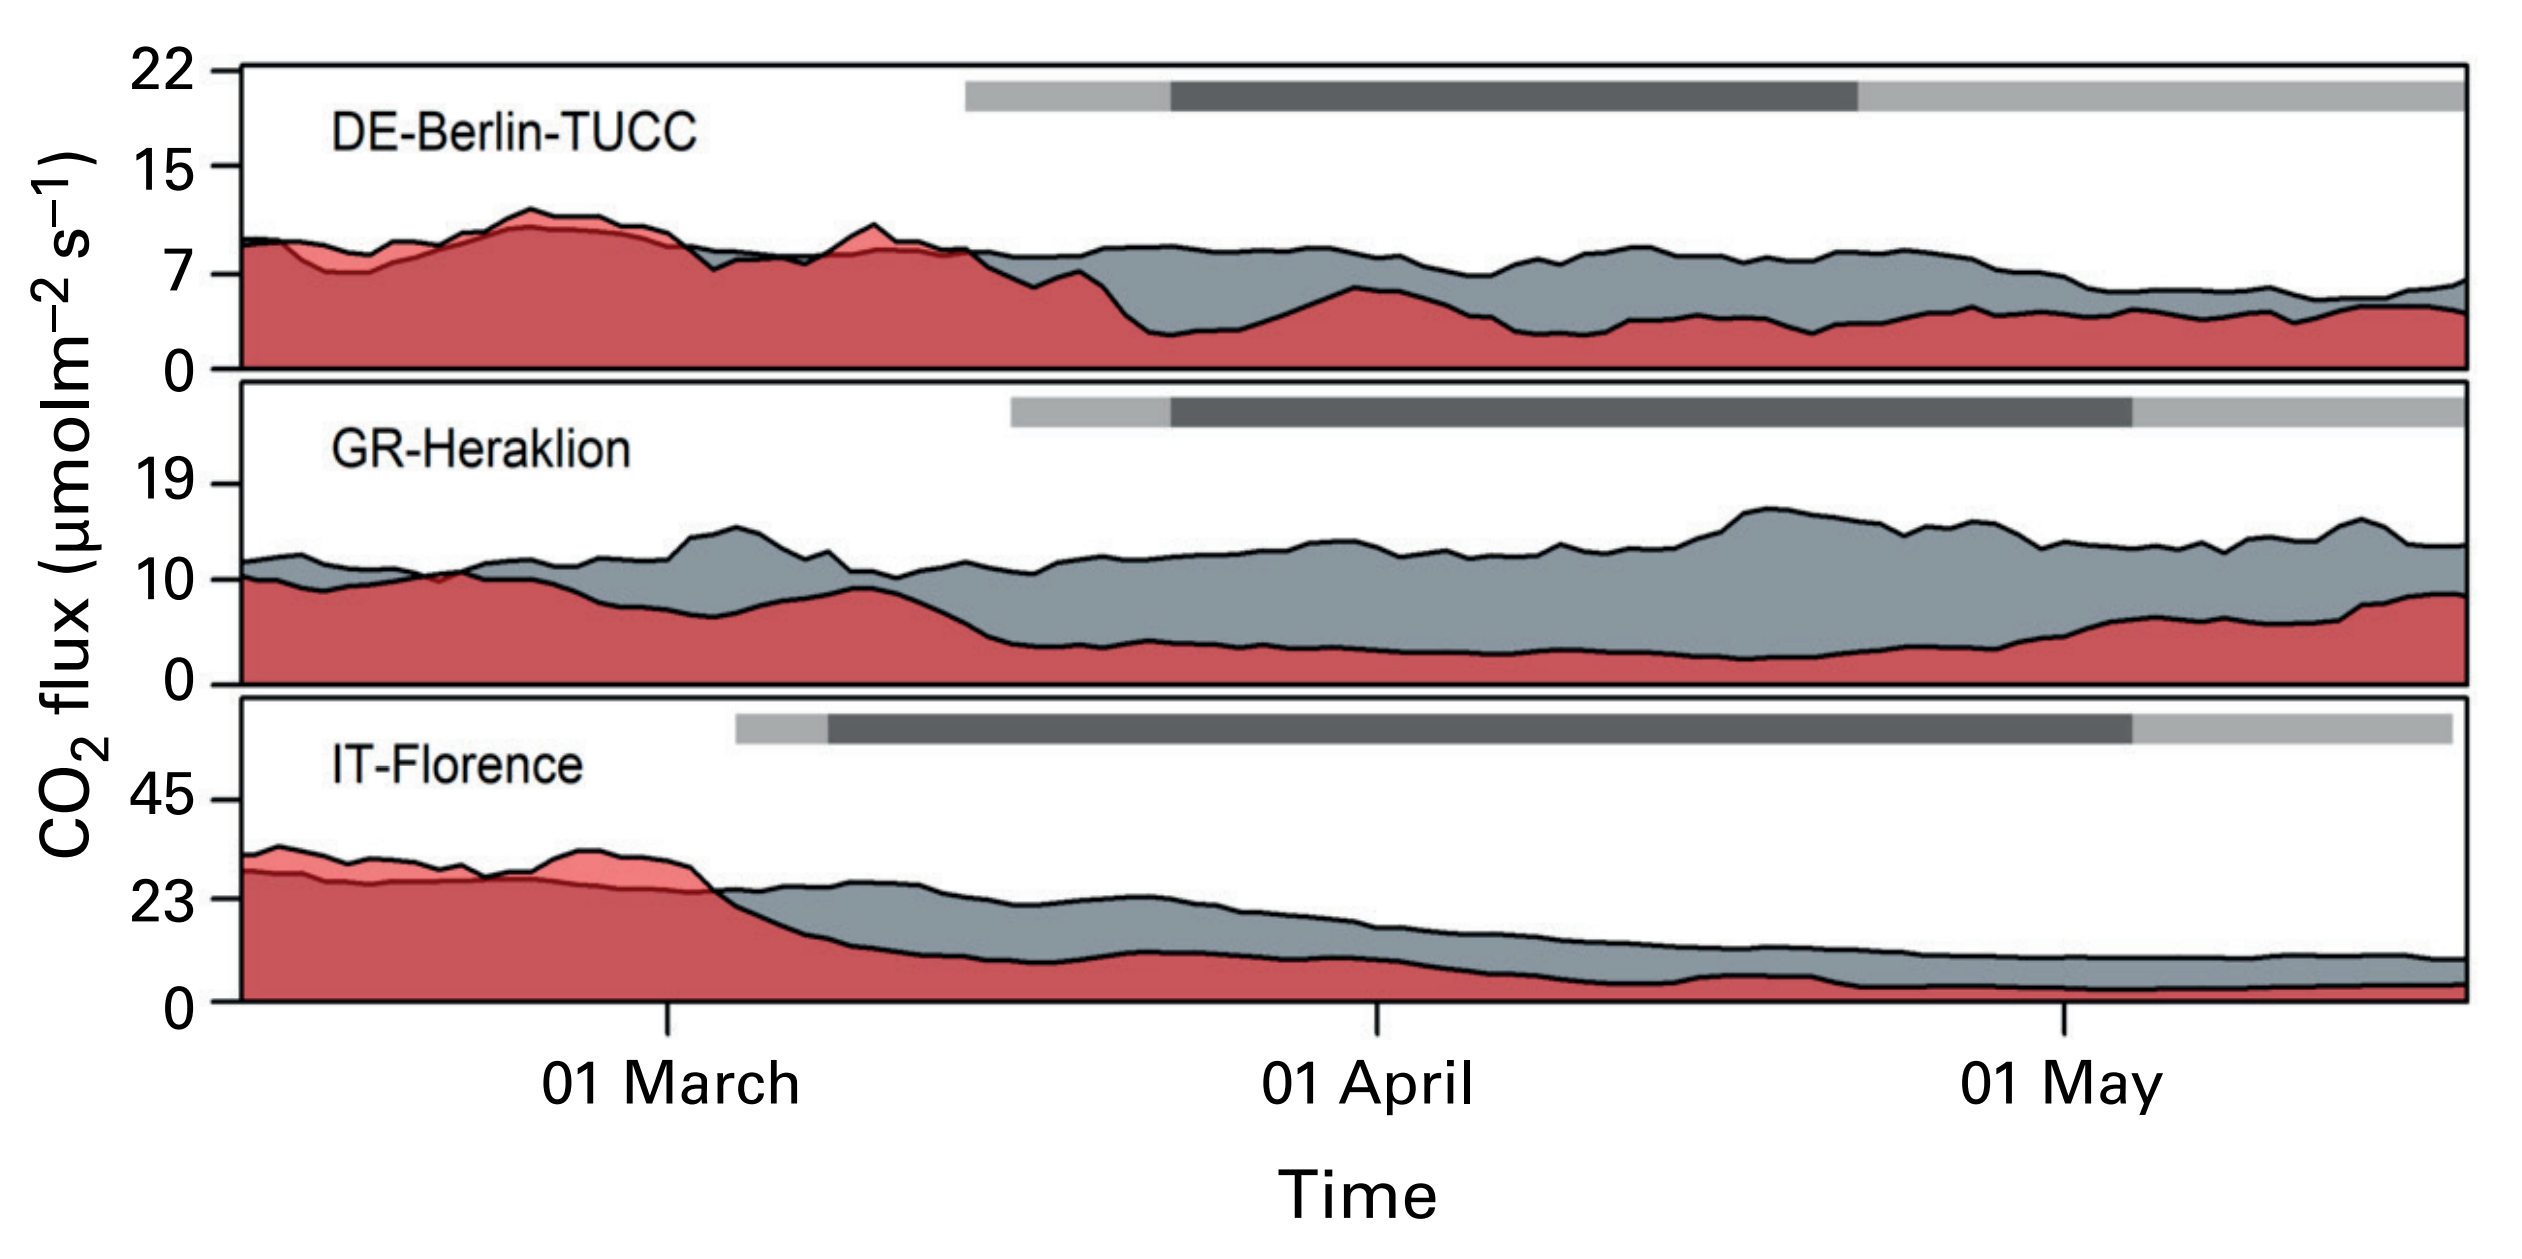 Average daily CO2 emissions from 5 February to 6 May 2020 (red area) and average of the previous years during the same period (grey area) for three European cities. The dark grey horizontal bars cover periods of official lockdown, while the light grey bars indicate periods of partial lockdown or general restrictions (for example, school closures, reductions in personal contact, mobility constraints). Data: Integrated Carbon Observation System, 2020. Graphic: WMO